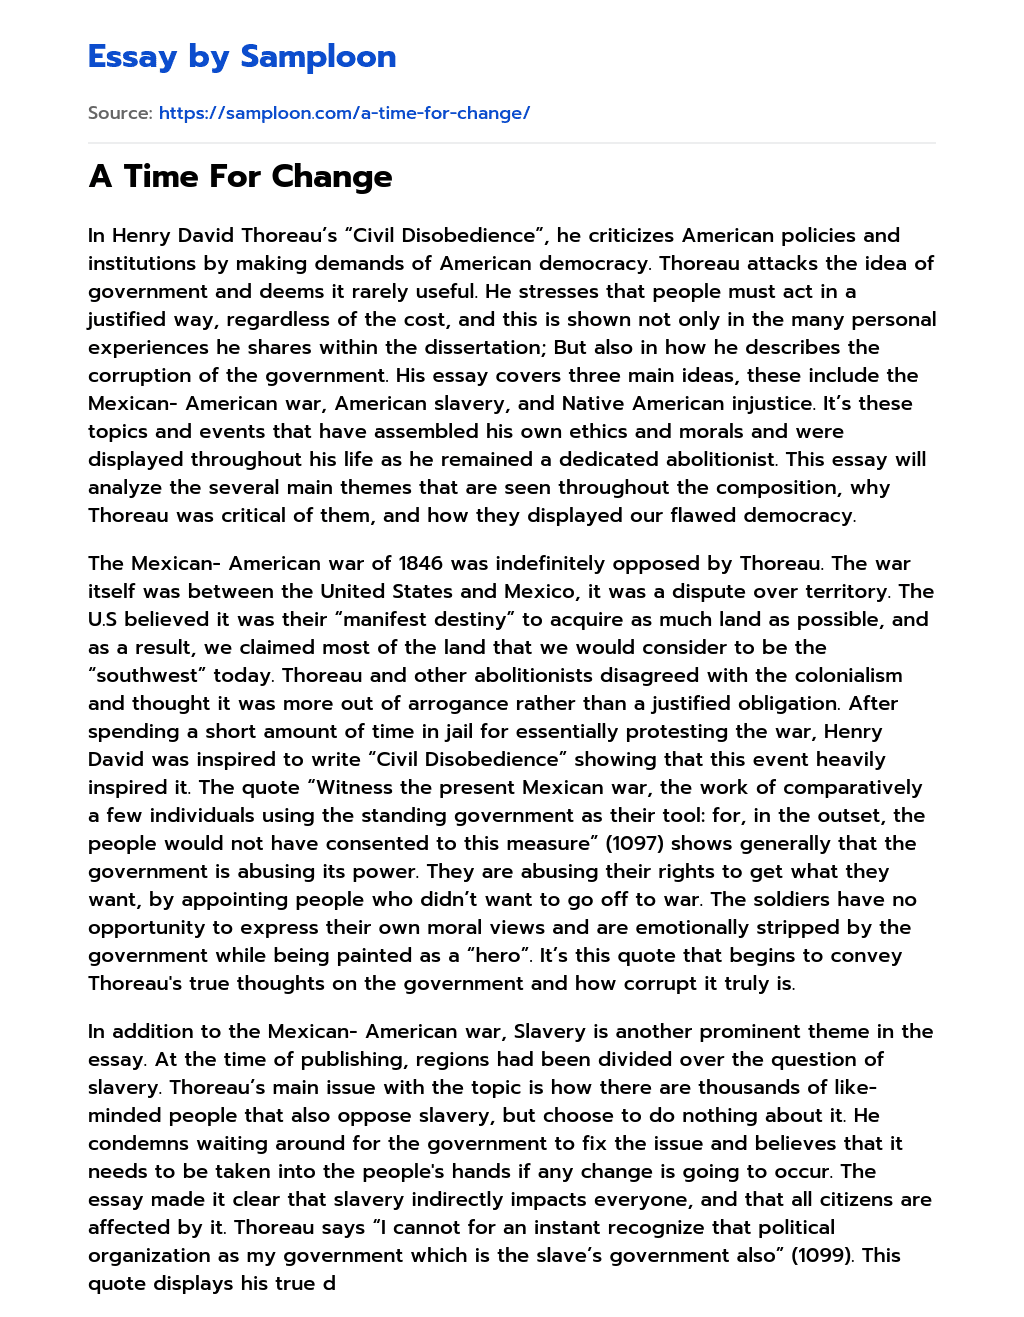 A Time For Change essay